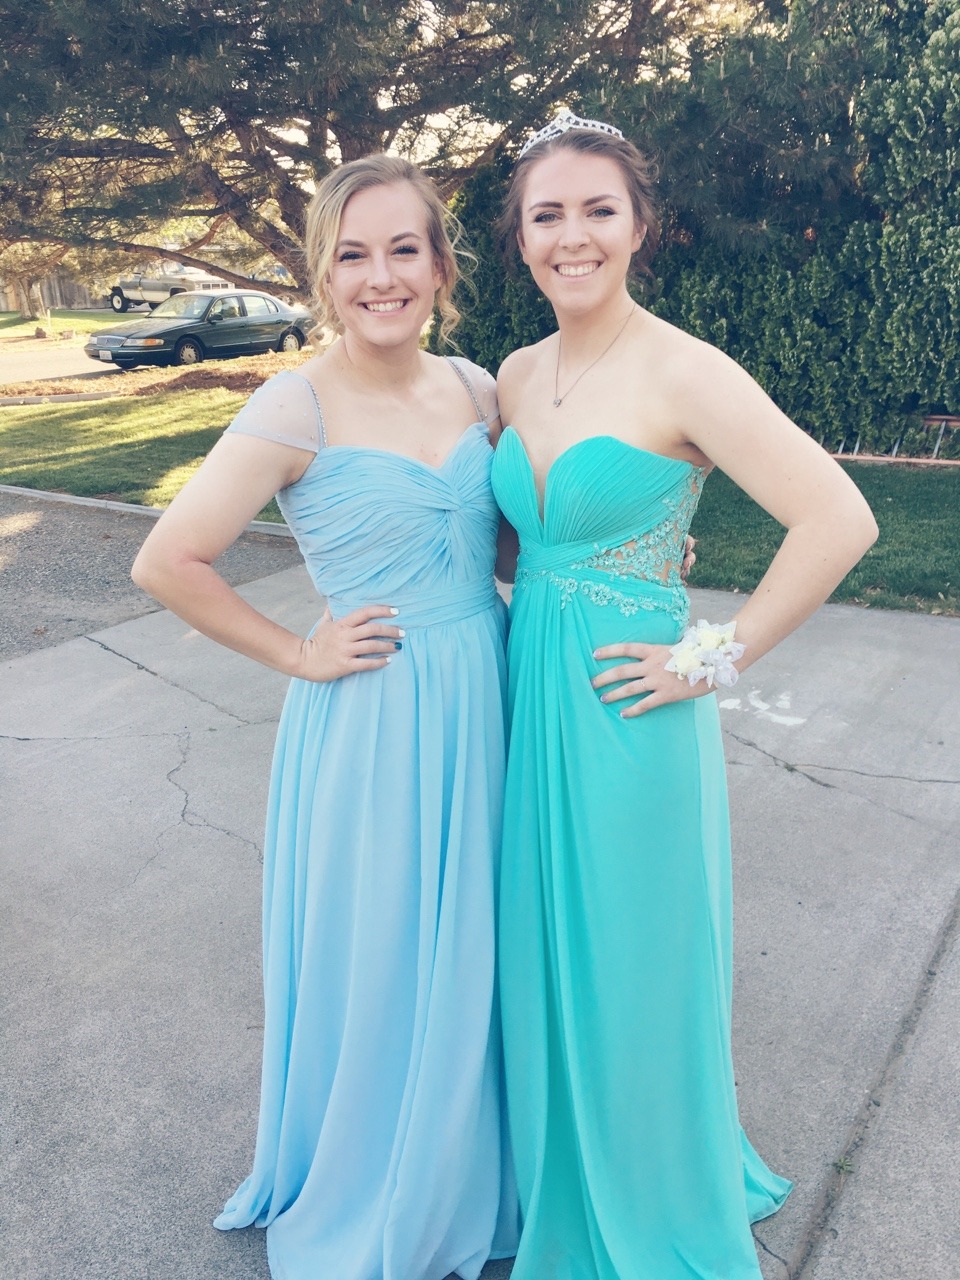 Lesbian Prom Photos - Page 20 - The L Chat